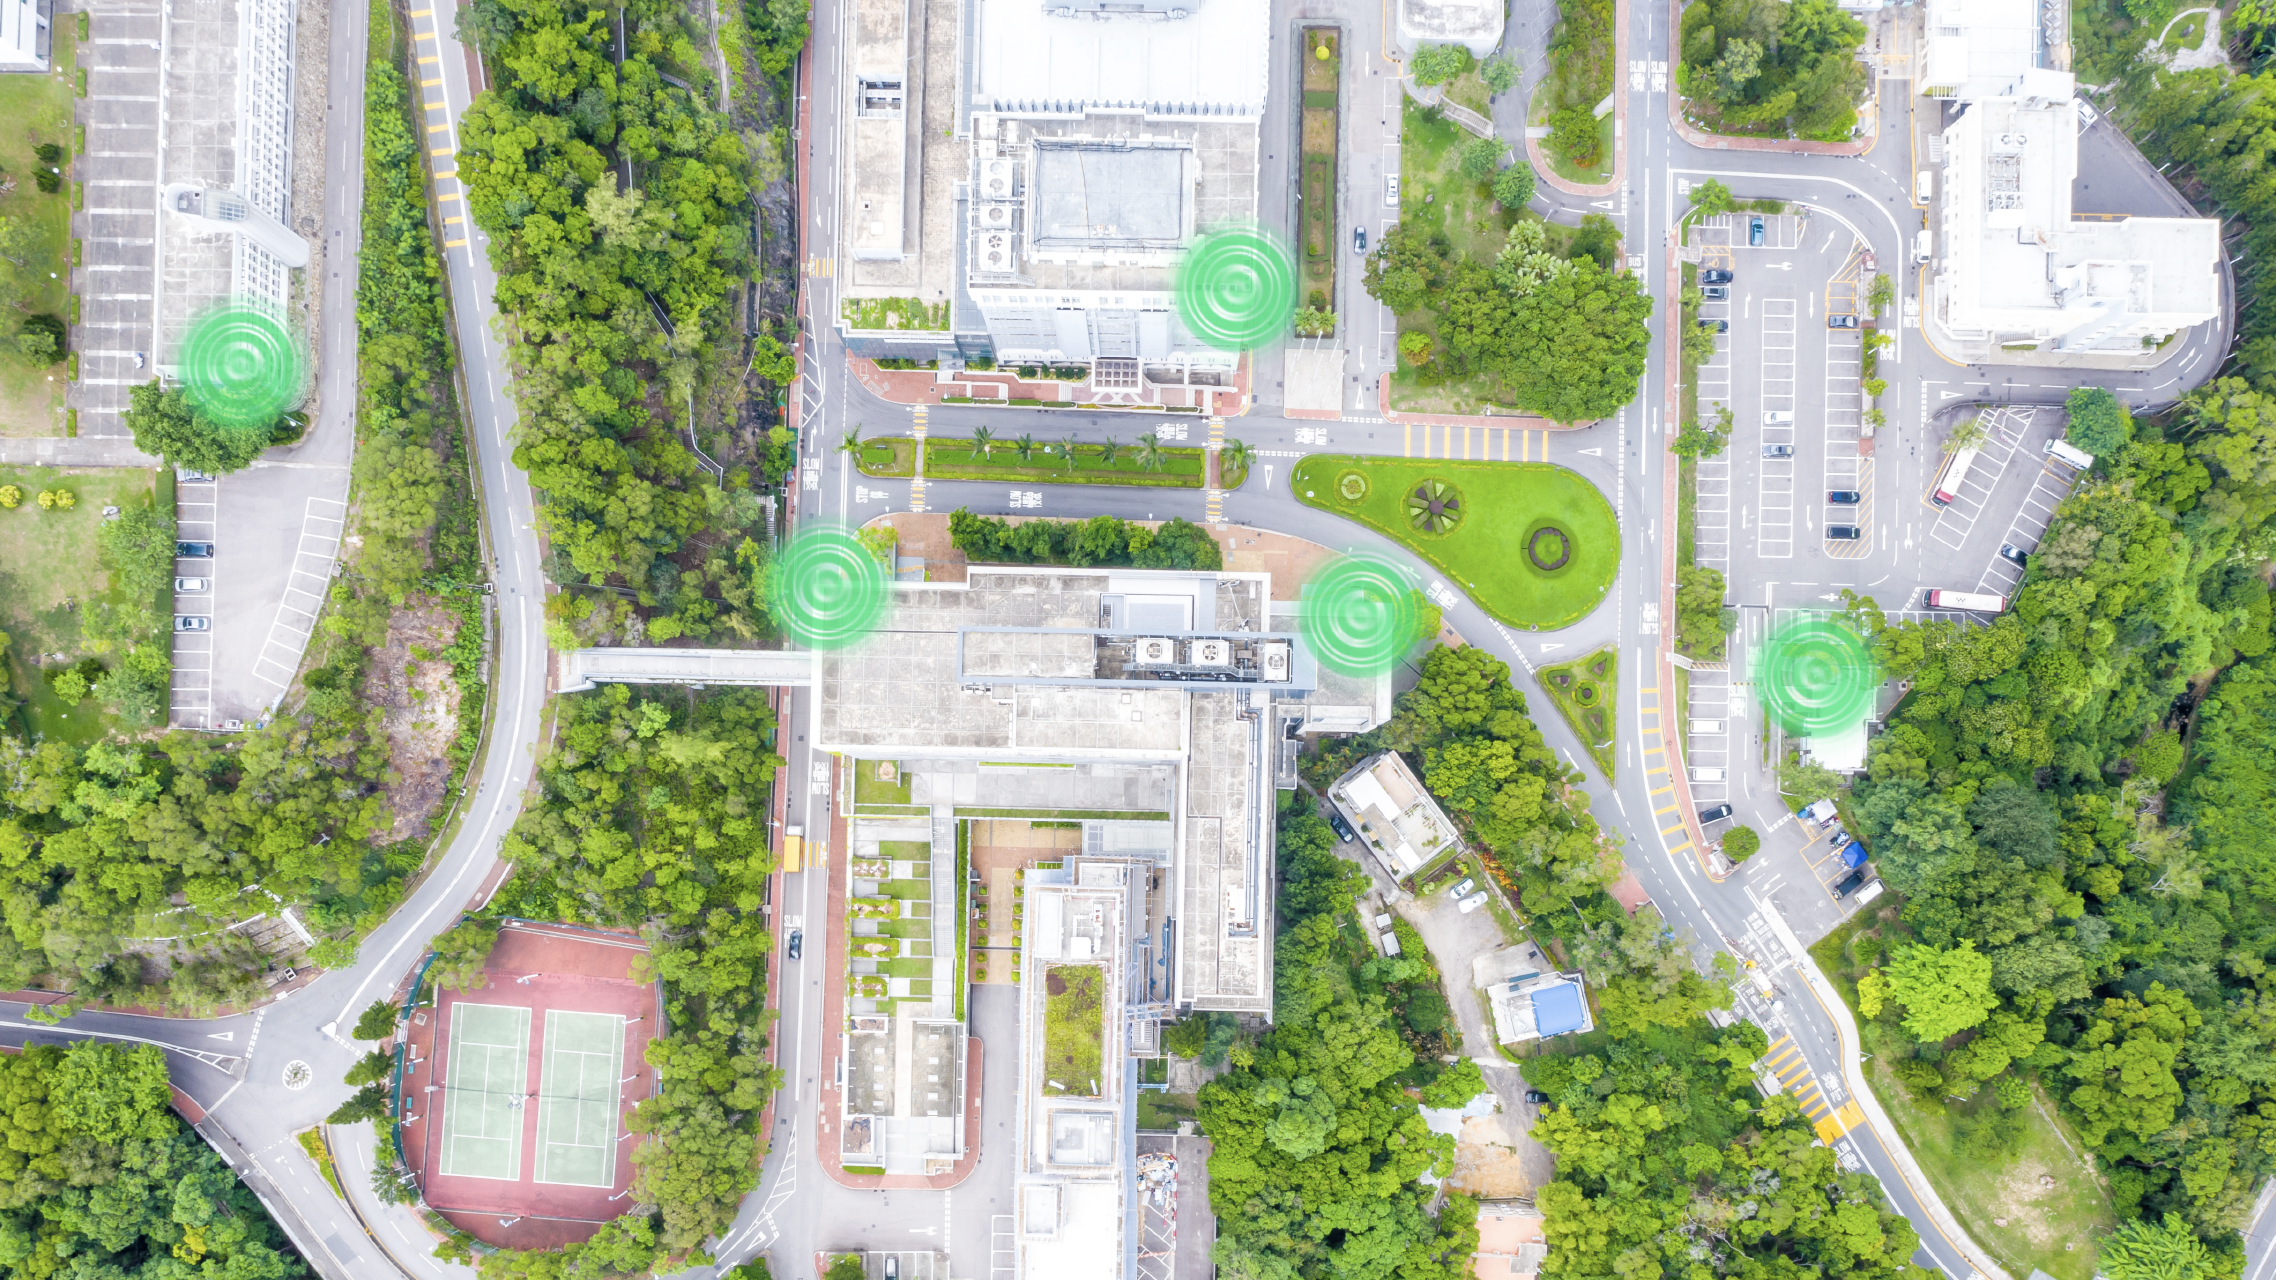 Residential area with homes monitored by sensors